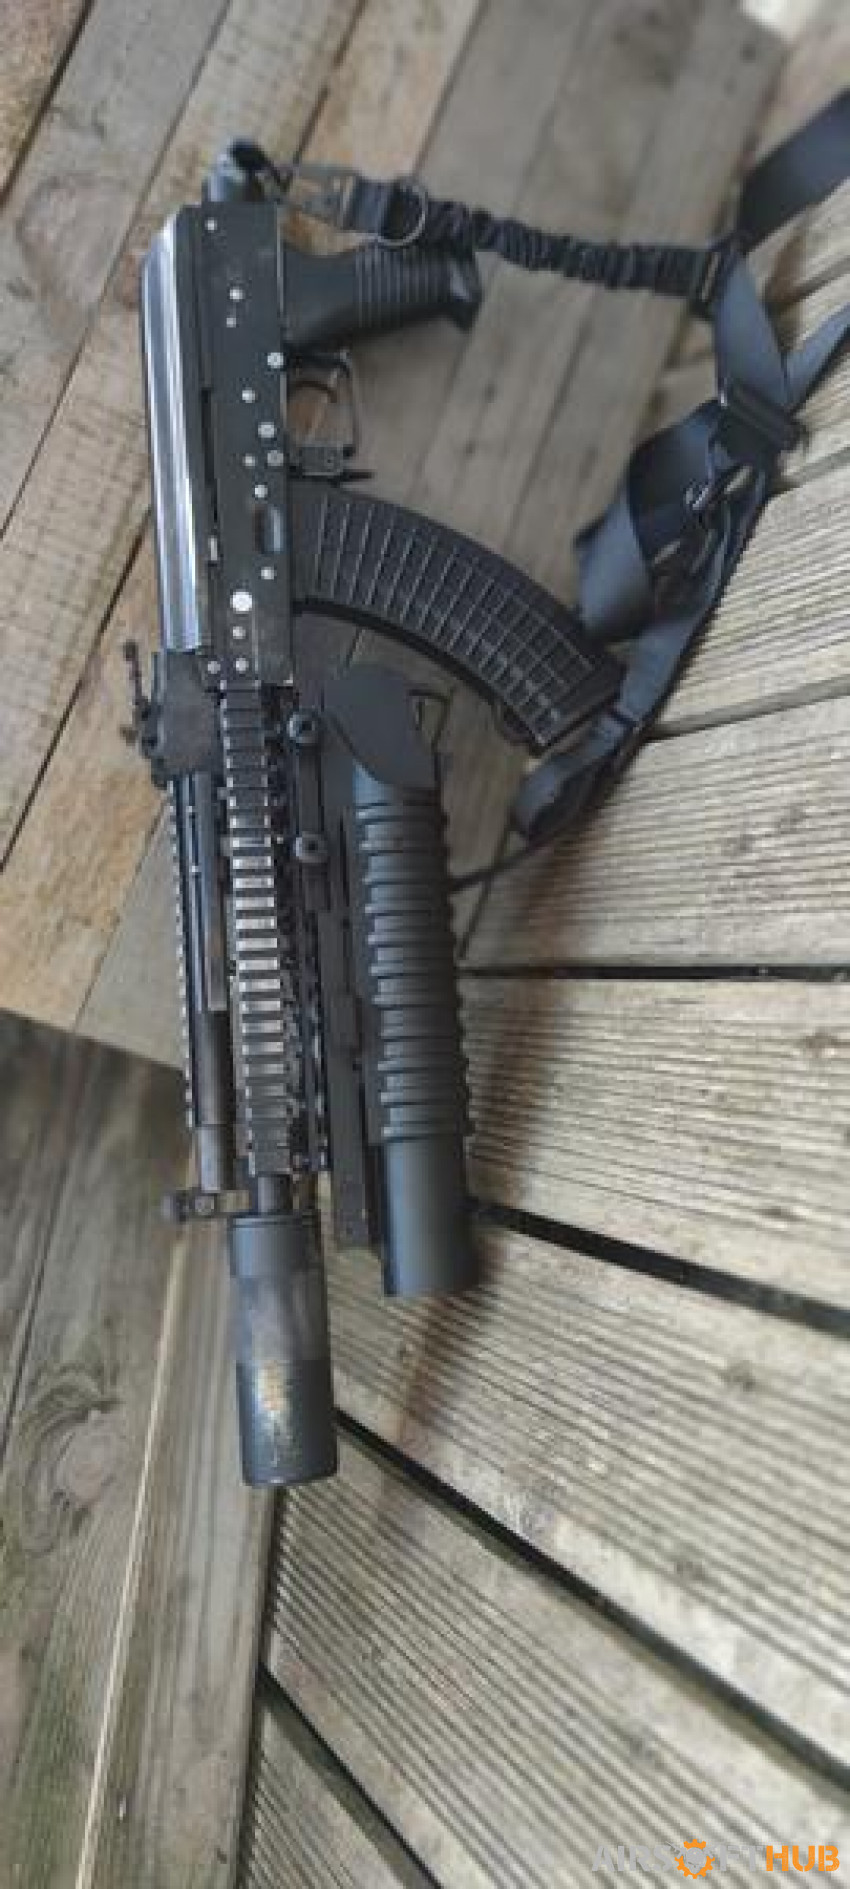 AK-47 with grande launcher - Used airsoft equipment